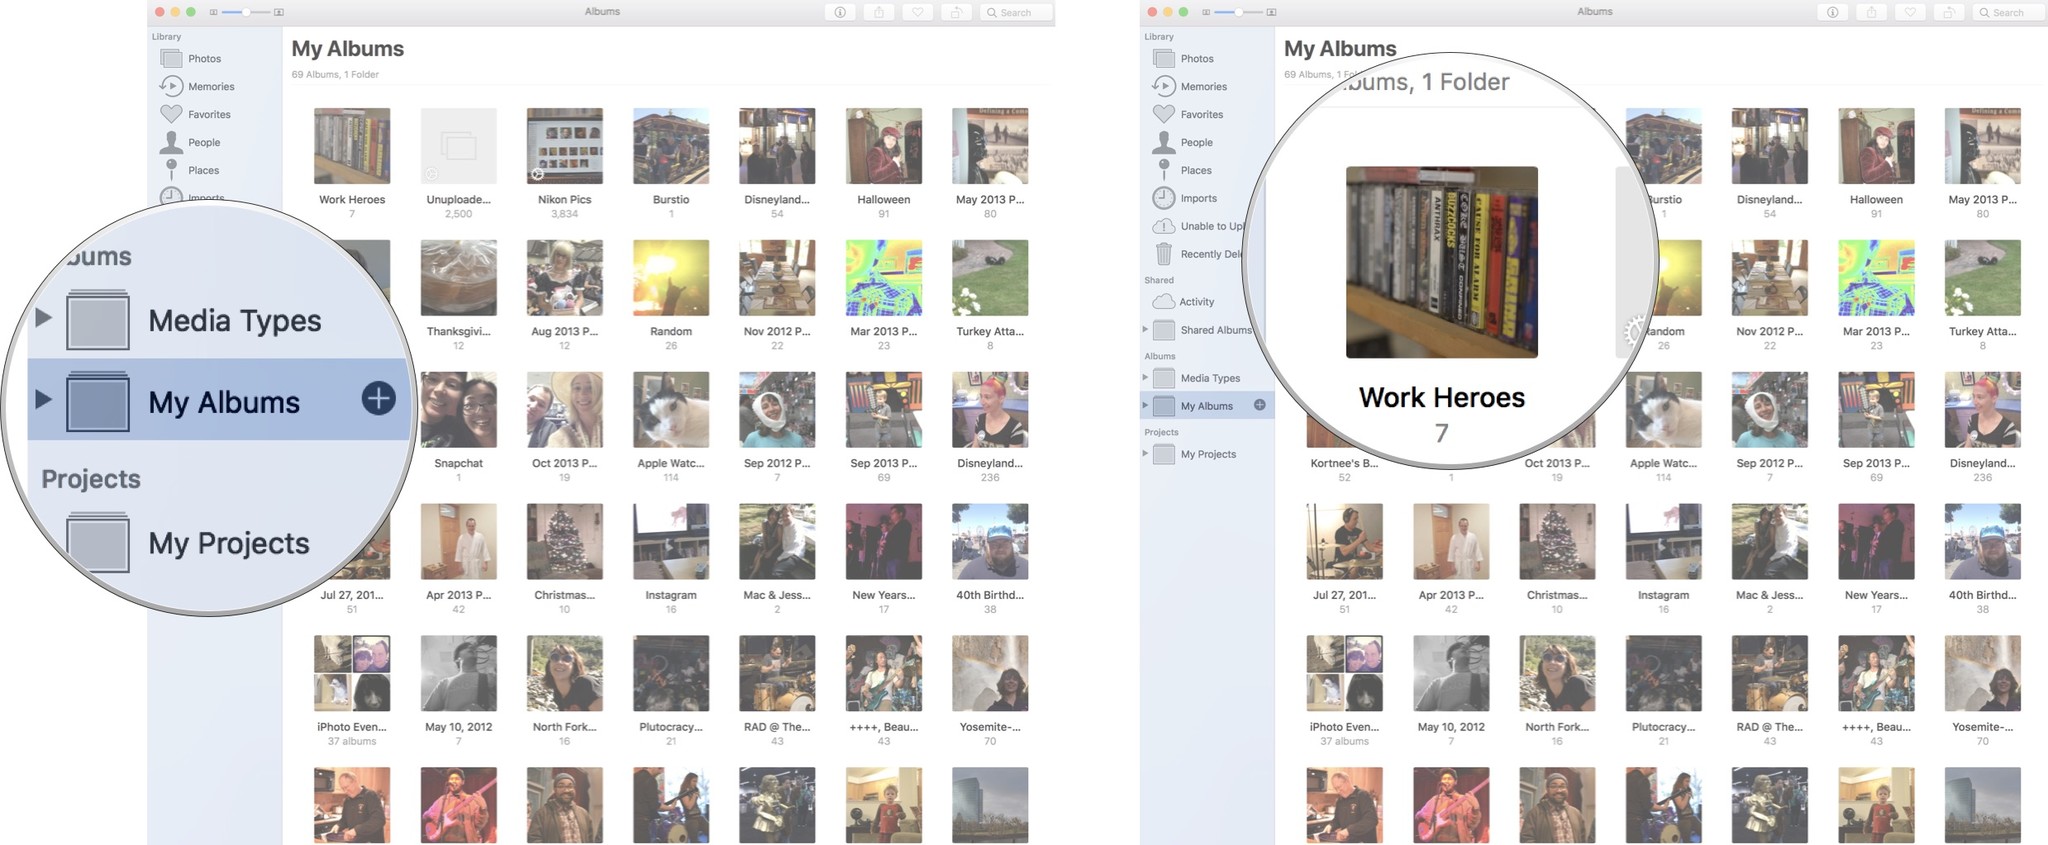 Find photos in album you've created on Mac: Click on My Albums, then double-click on your album